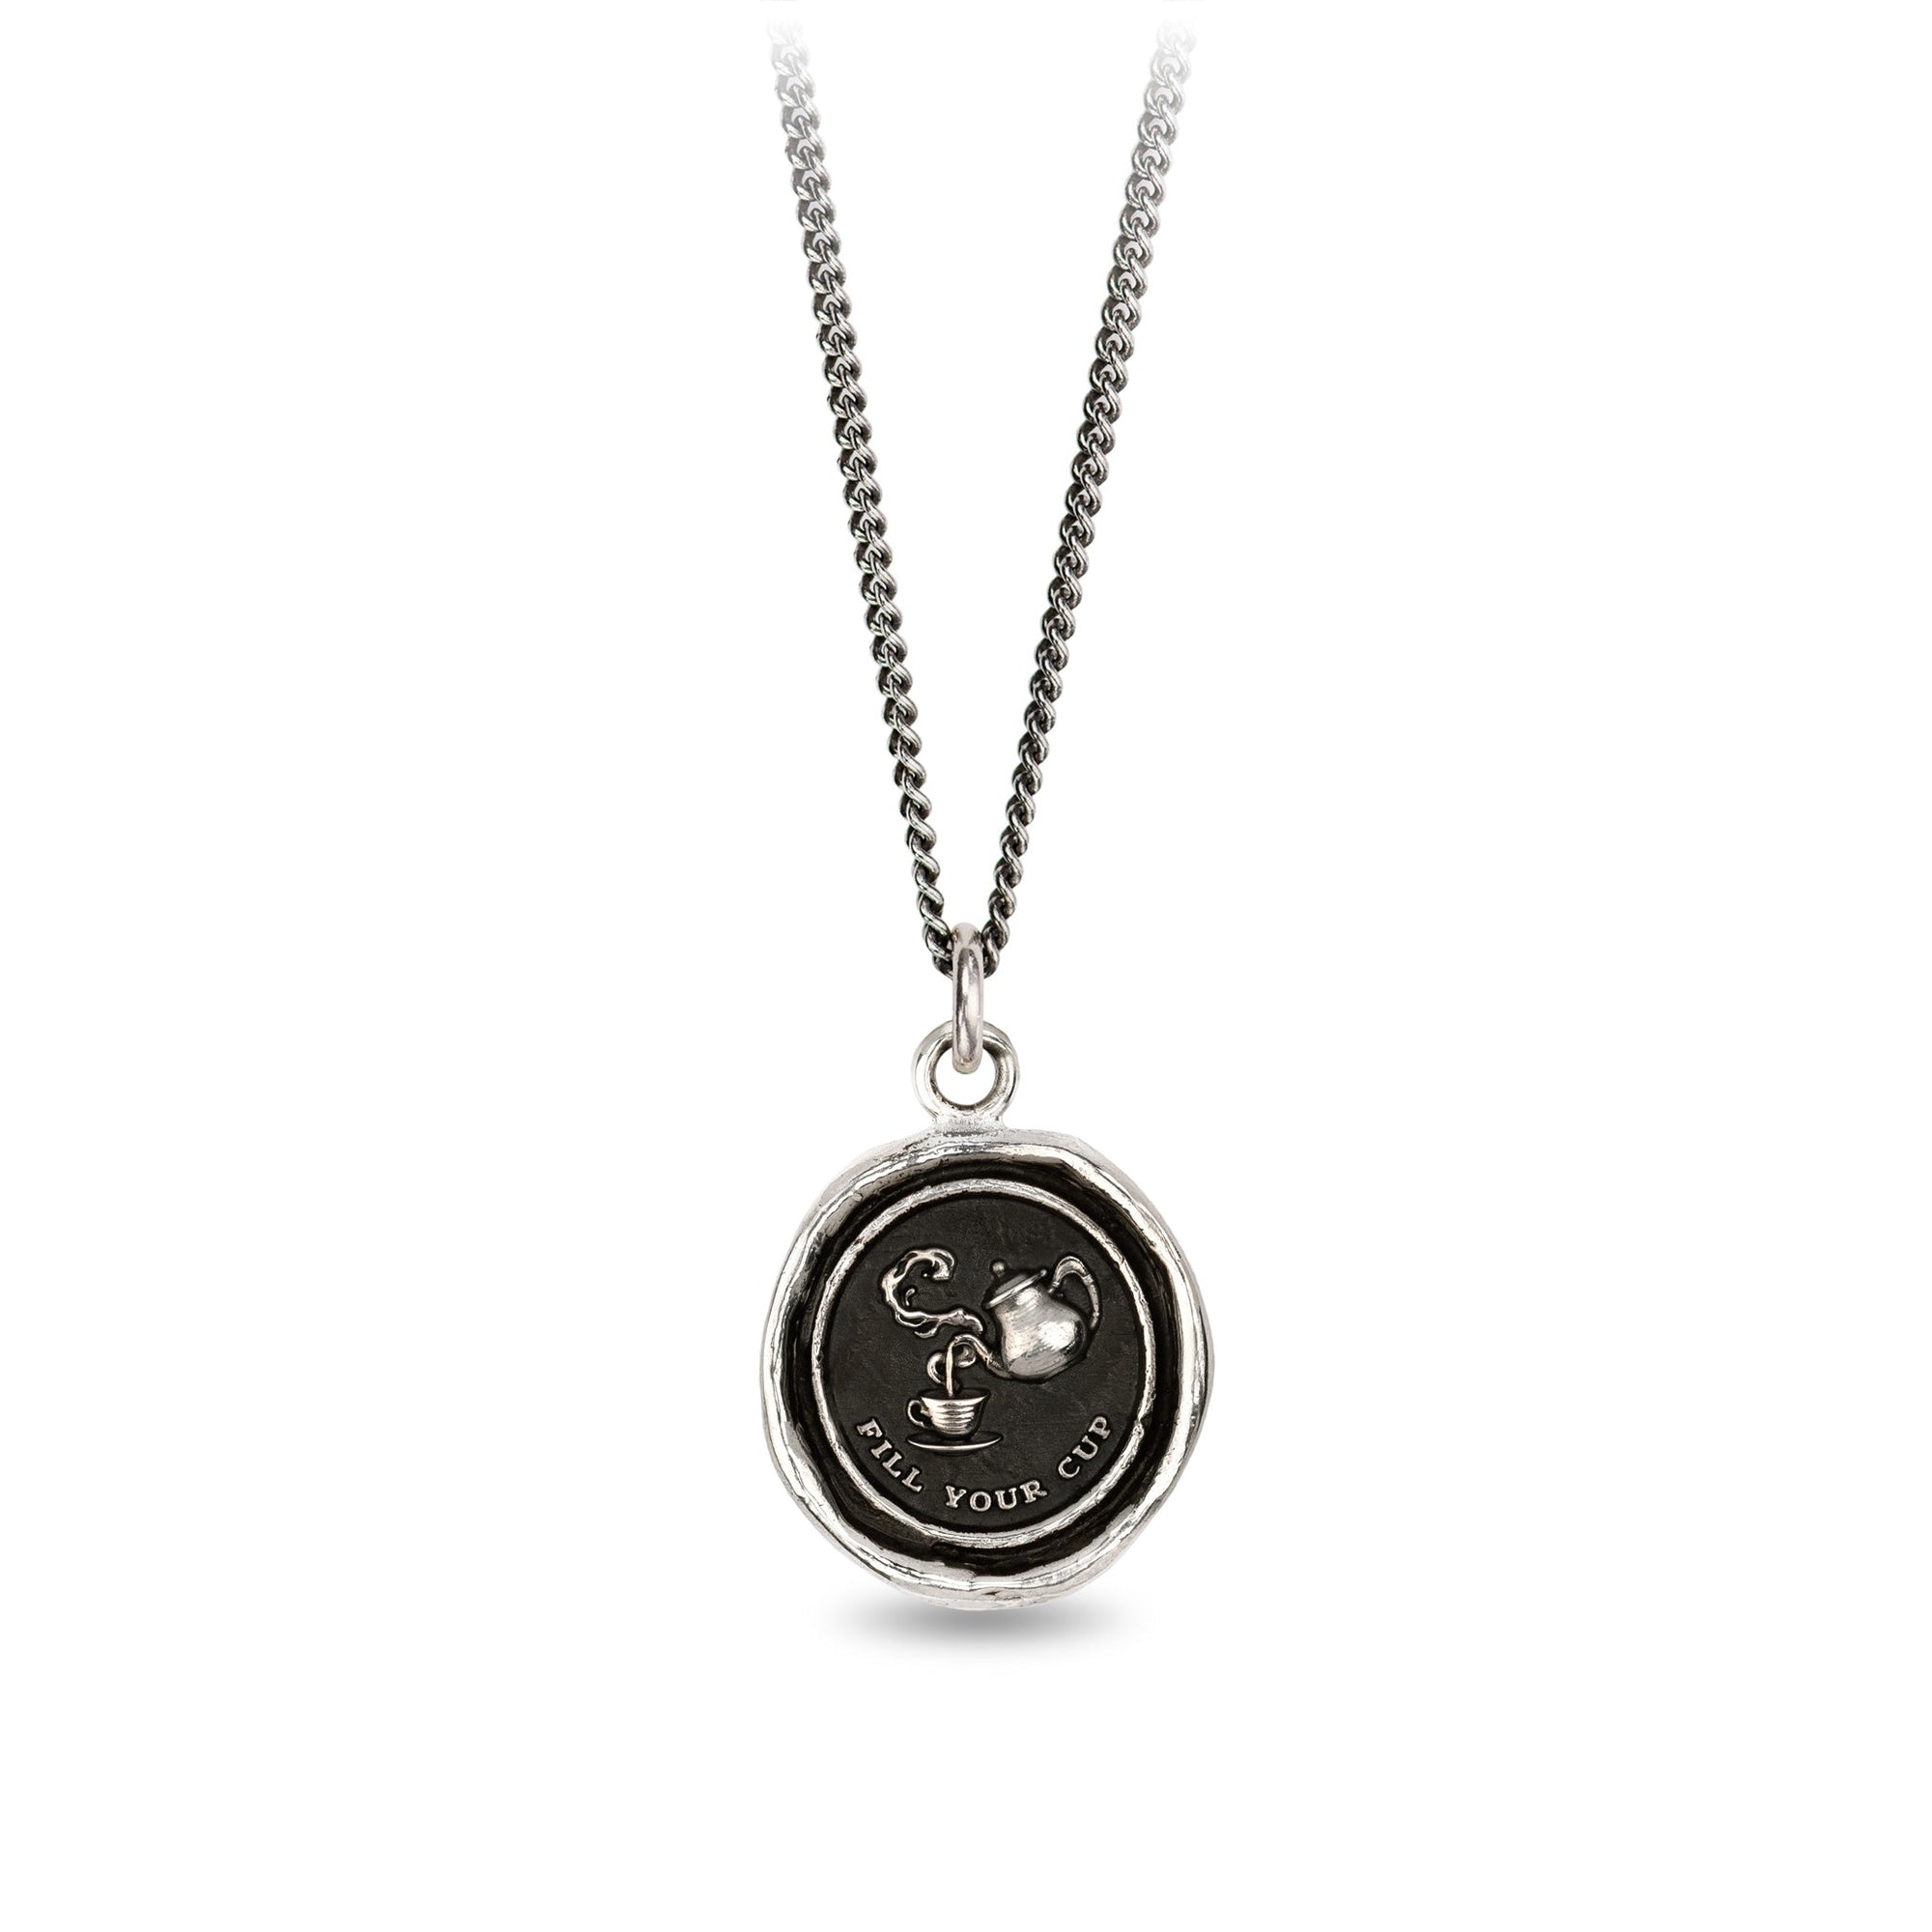 Fill Your Cup Talisman Necklace